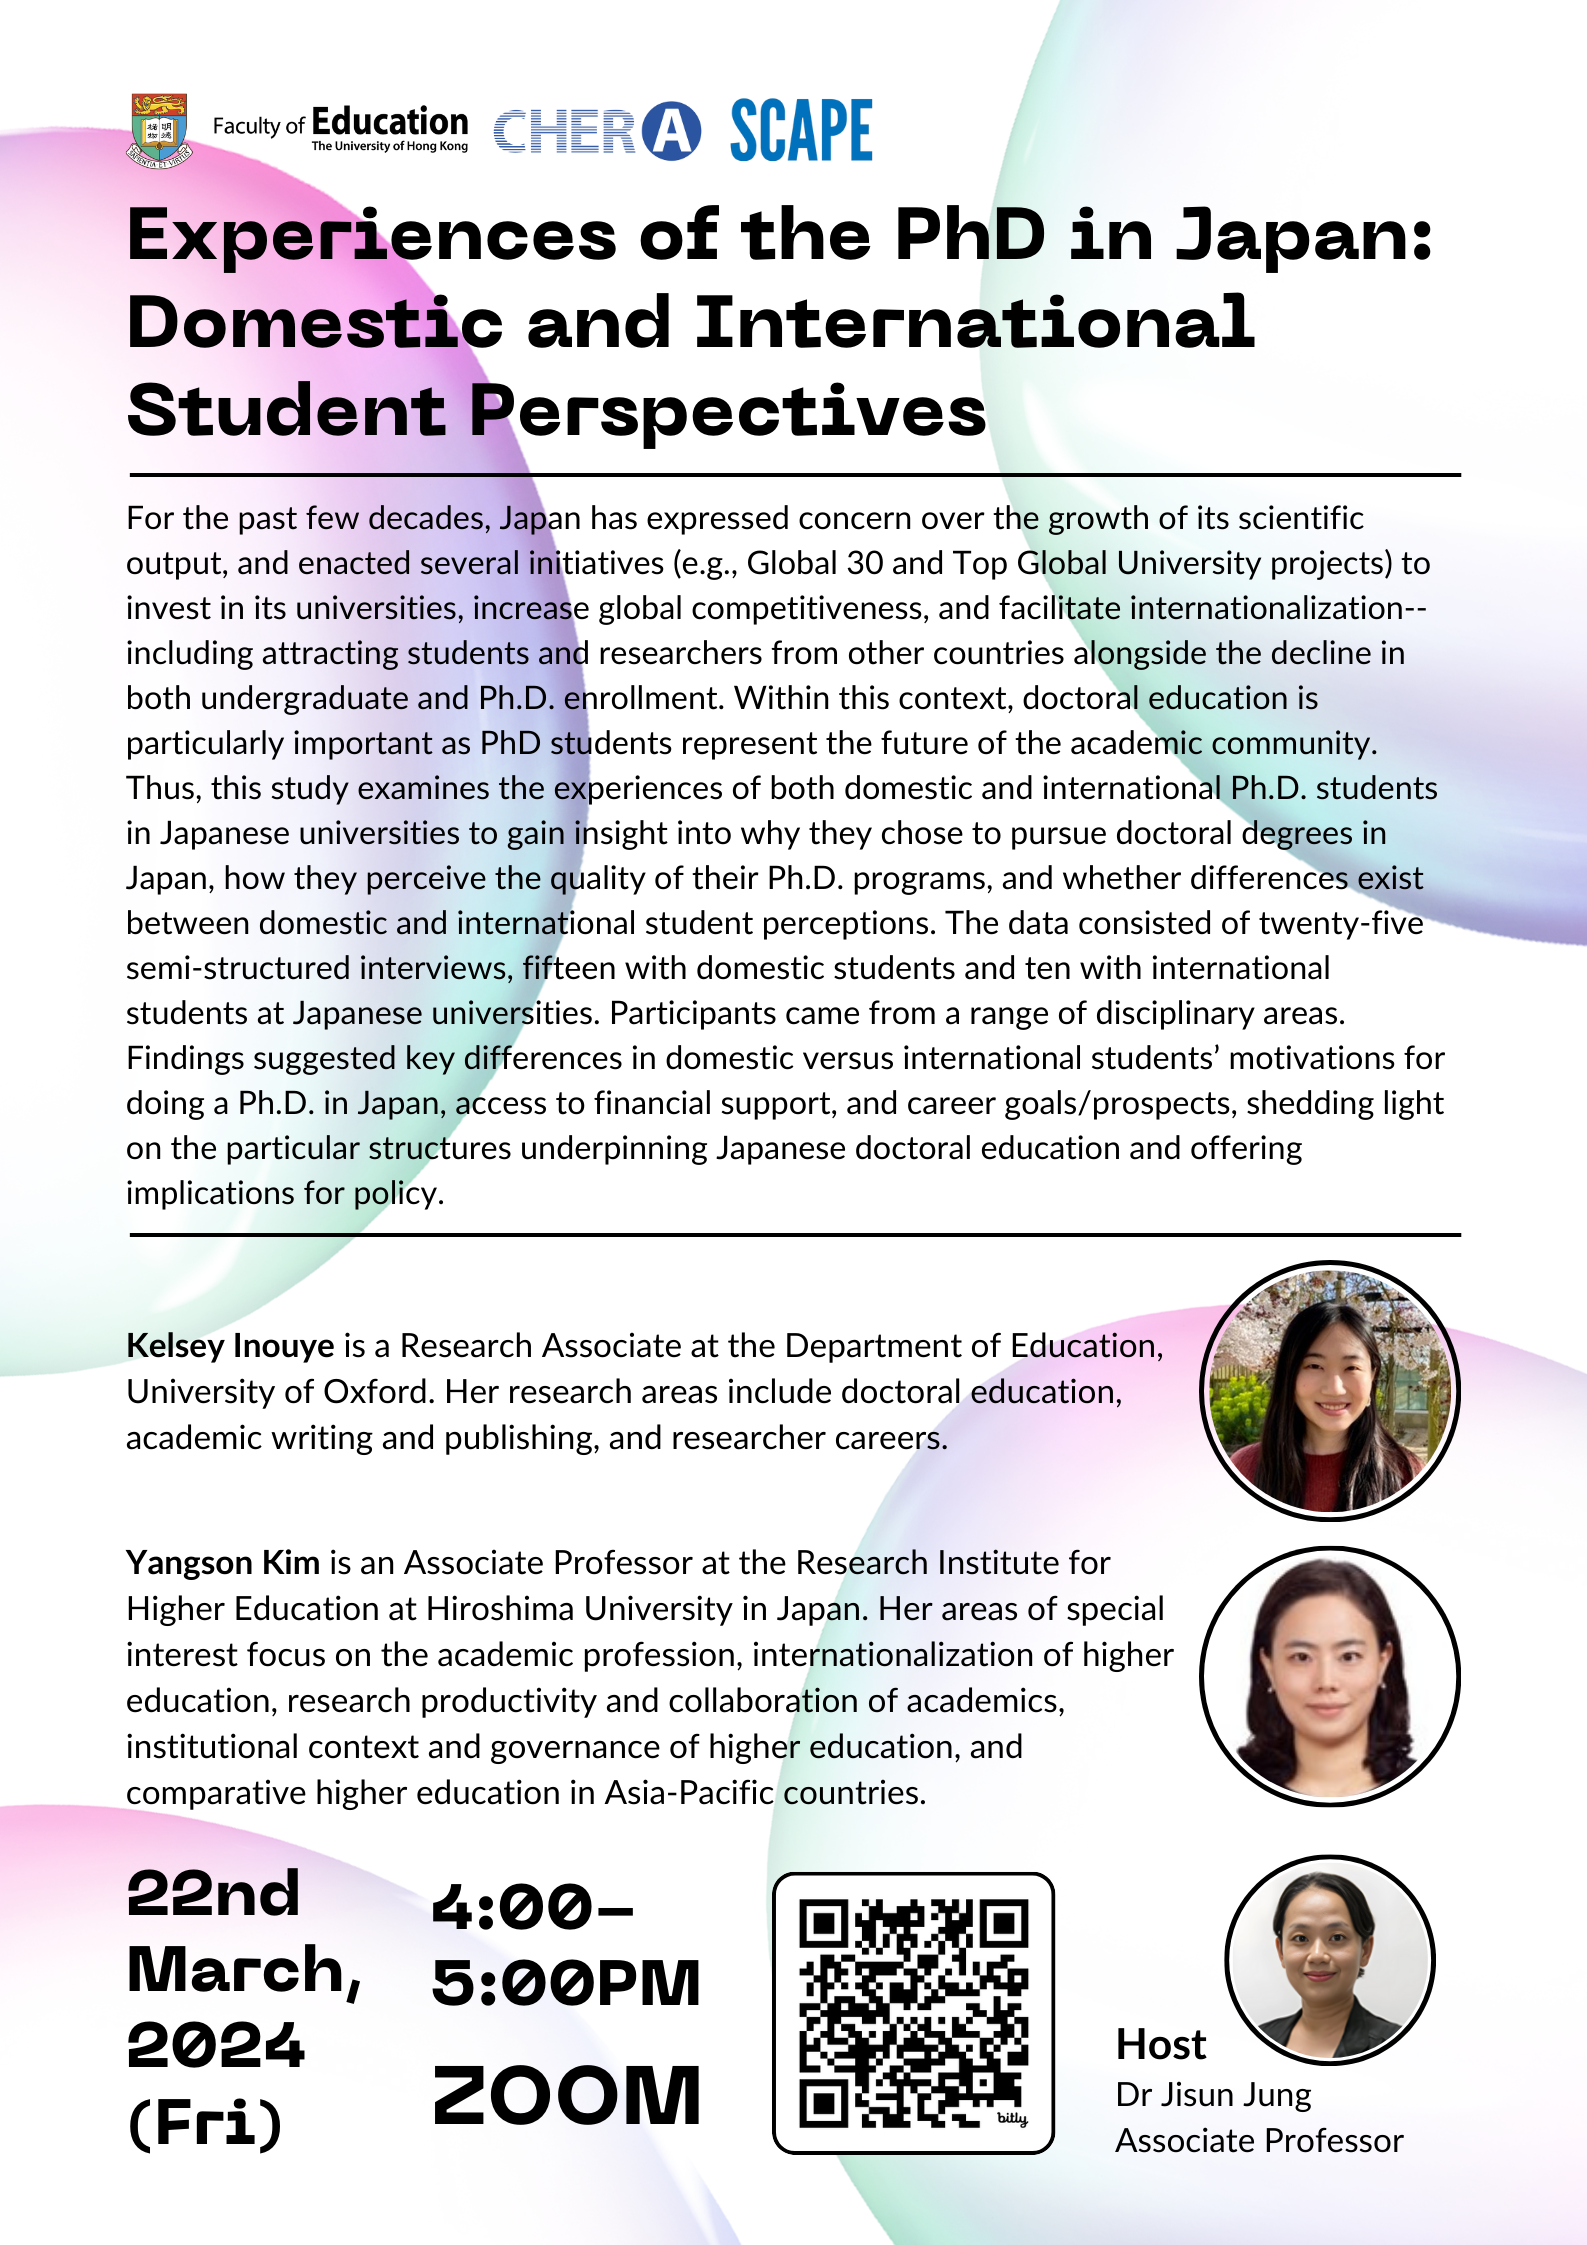 *[March 22, 2024] Experiences of the PhD in Japan: Domestic and International Student Perspectives